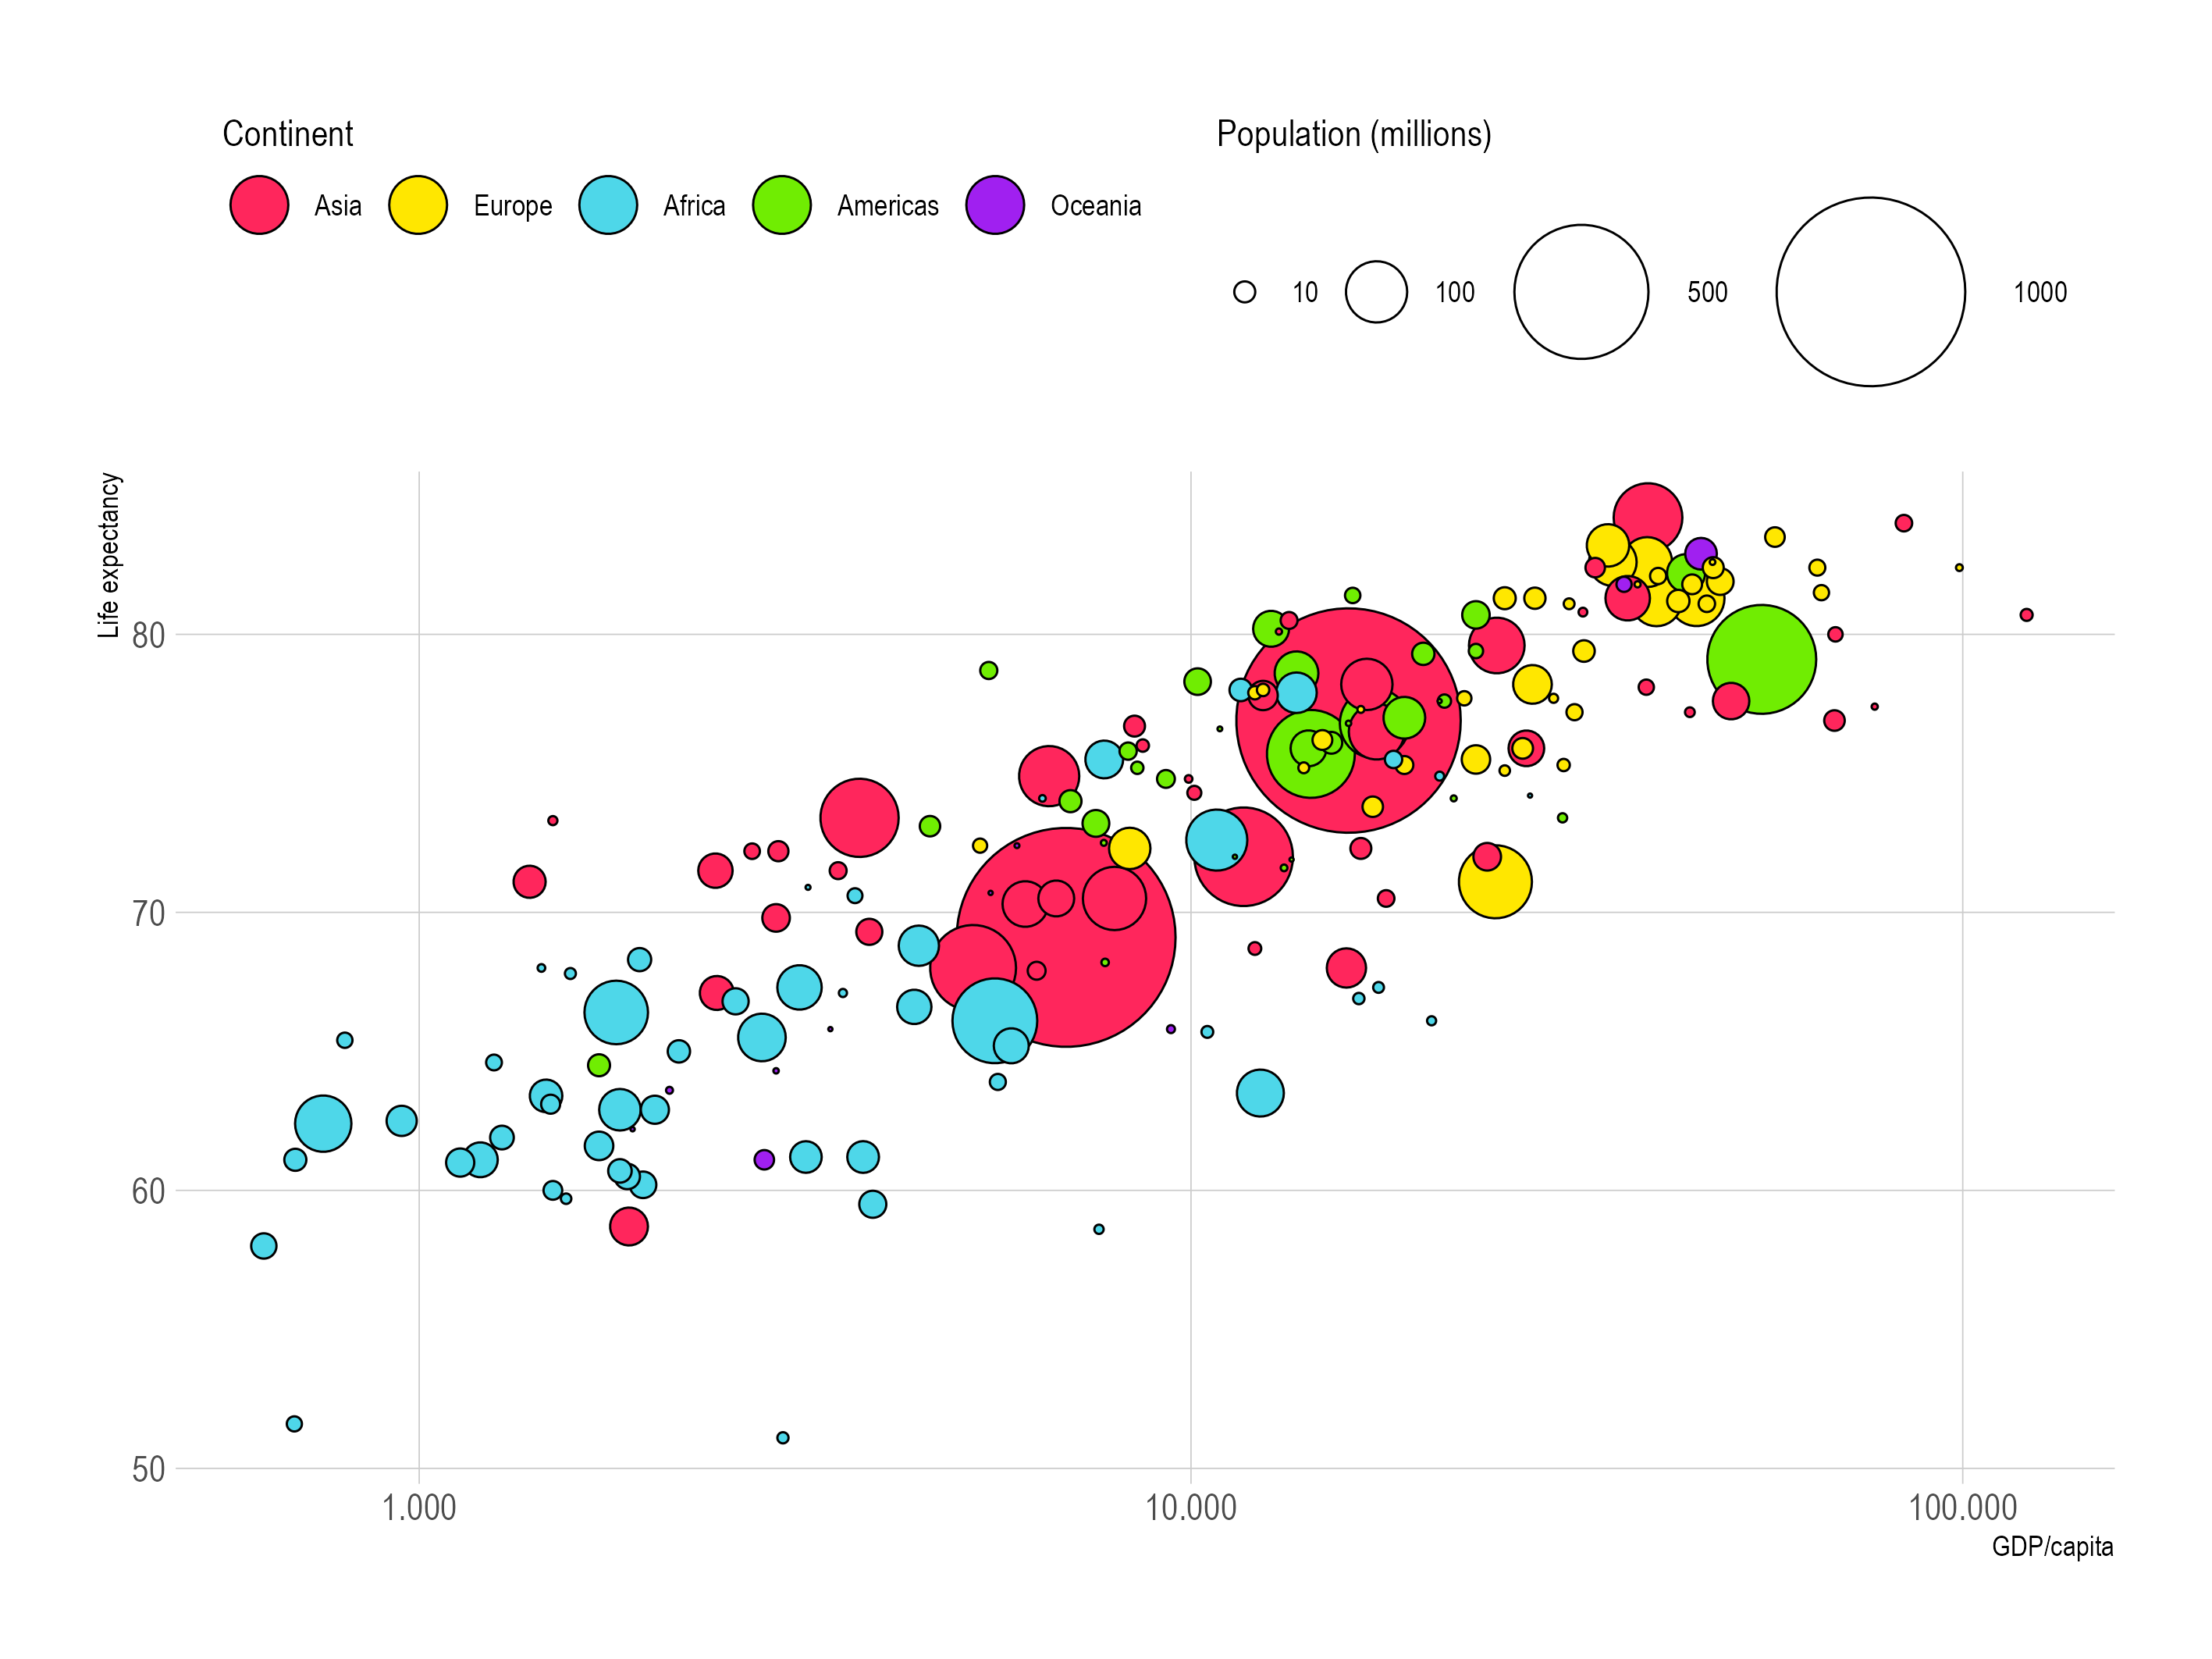 A bubble chart of countries, with their GDP/capita on the x axis and their life expectancy on the y axis